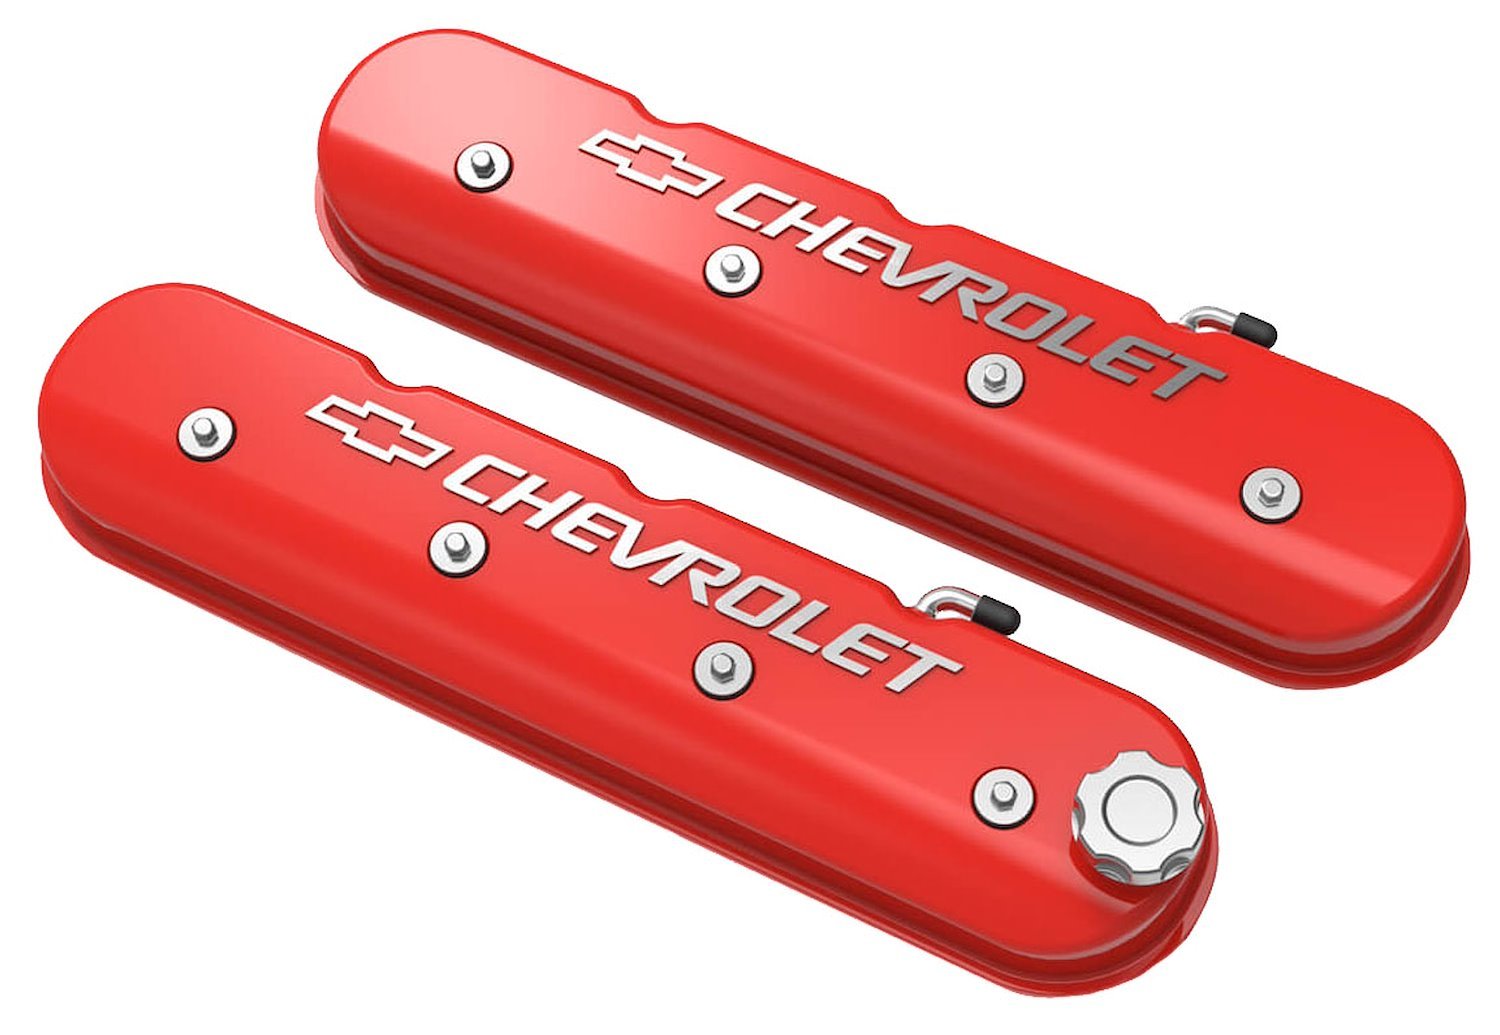 Aluminum Valve Covers GM LS1/LS2/LS3/LS6/LS7 Engines, Chevrolet with Bowtie Logo - Gloss Red Finish